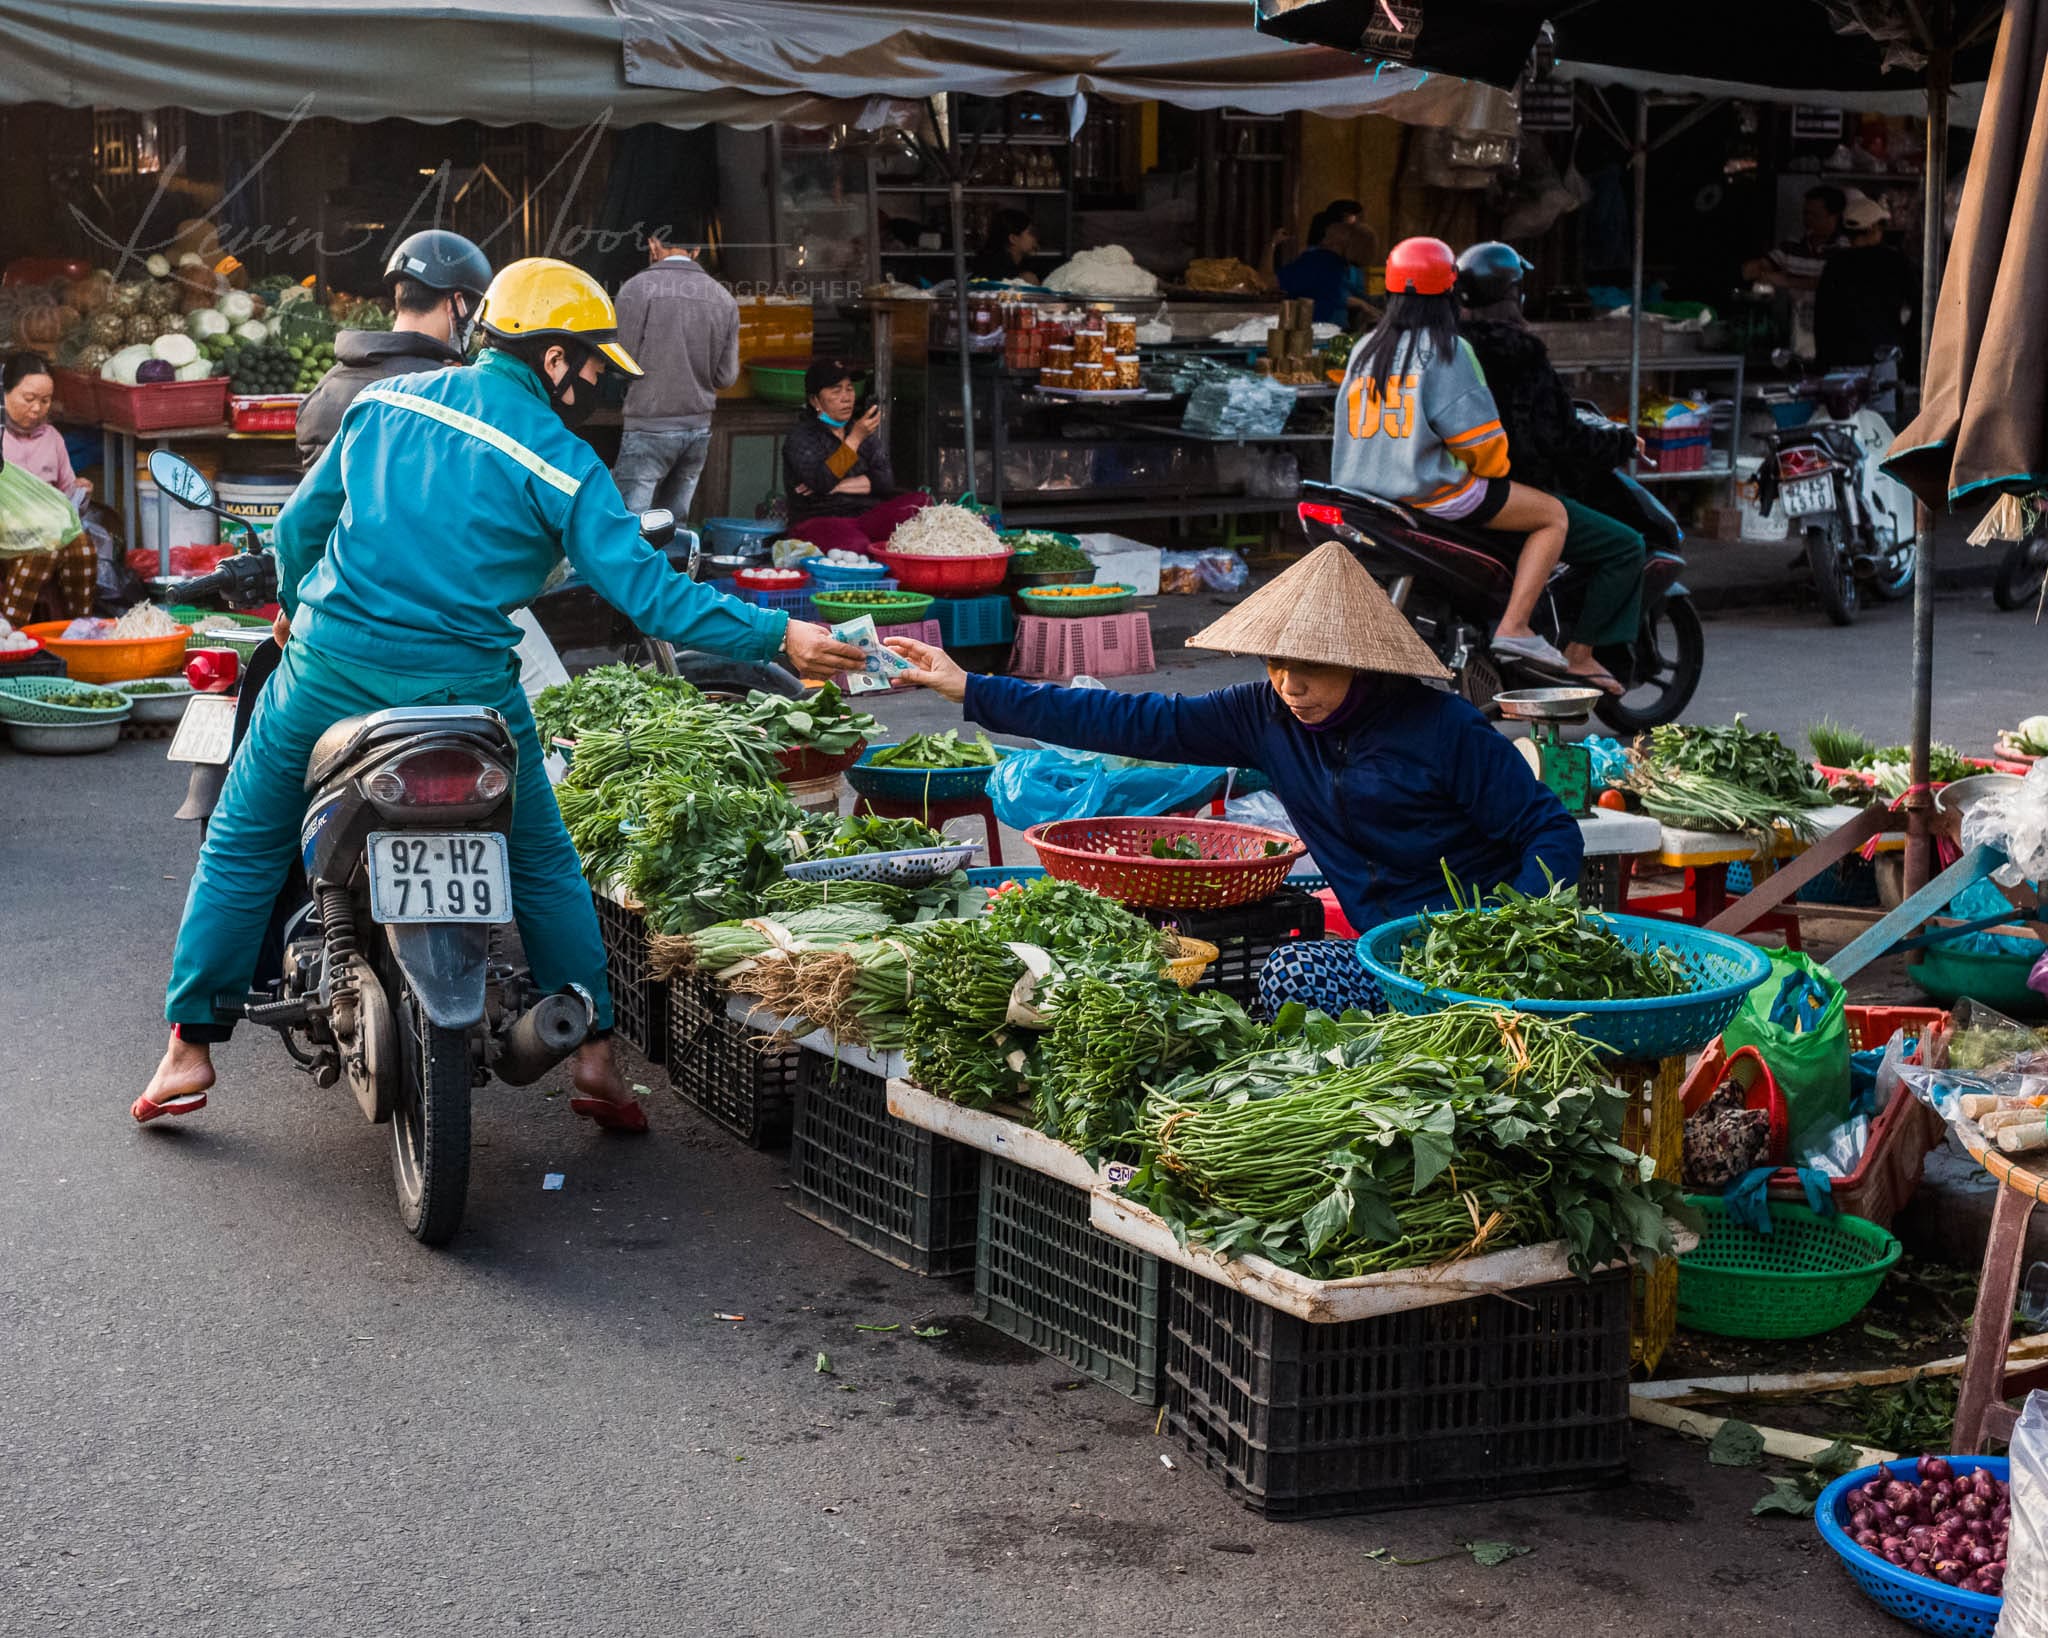 Busy Vietnam street market with fresh produce and a passing motorcyclist.